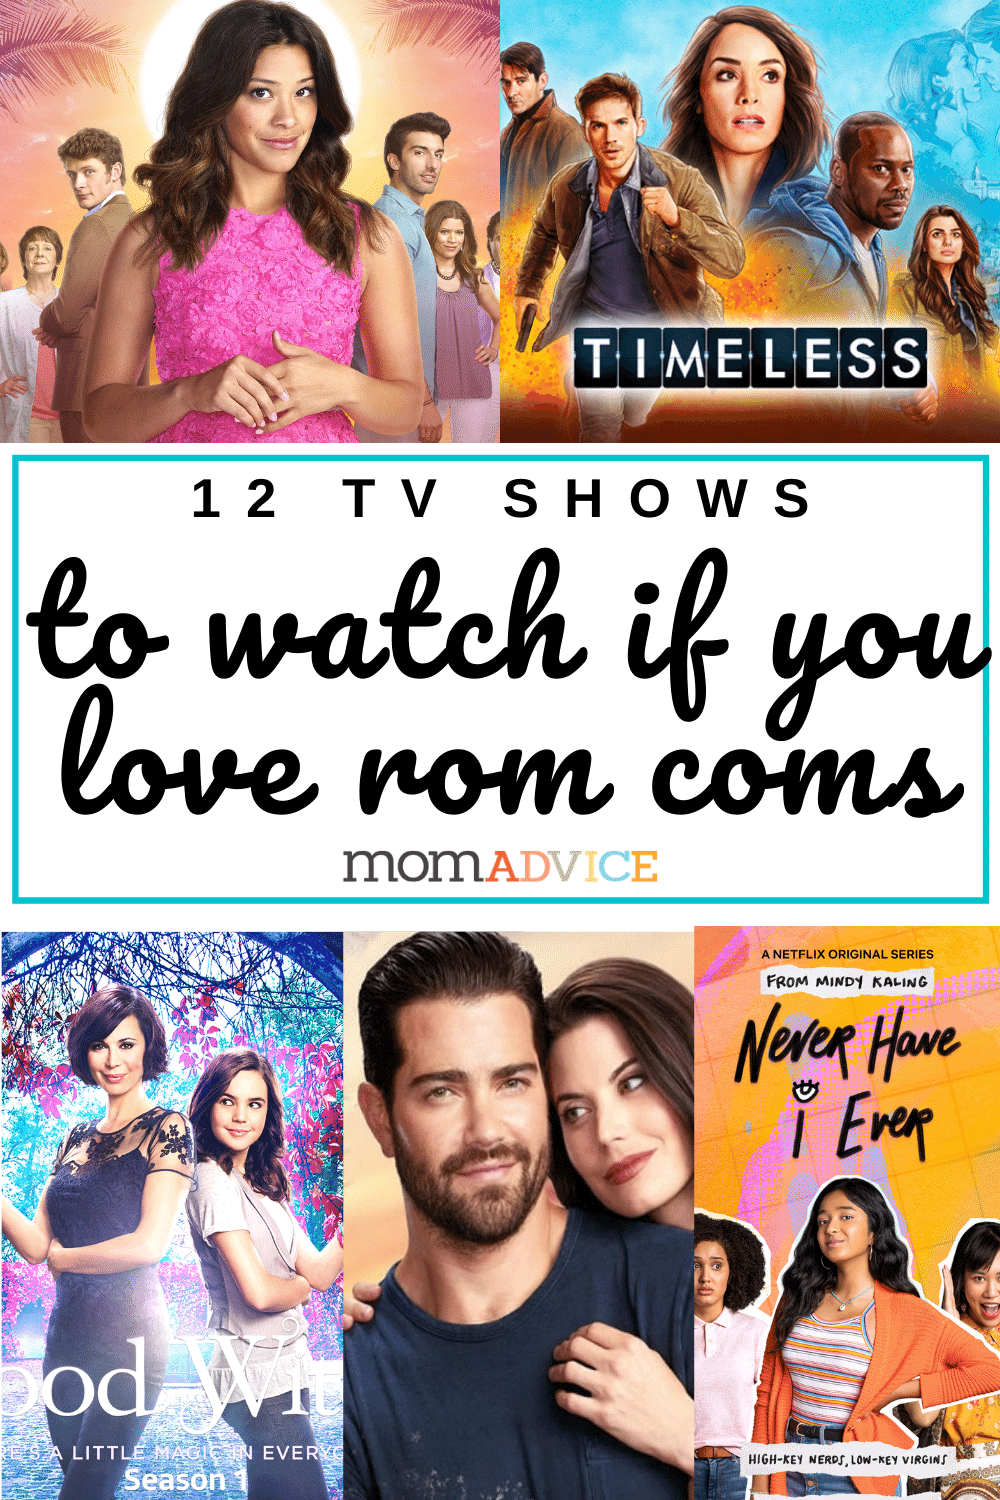 TV Shows to Watch if You Love Romantic Comedies from MomAdvice.com